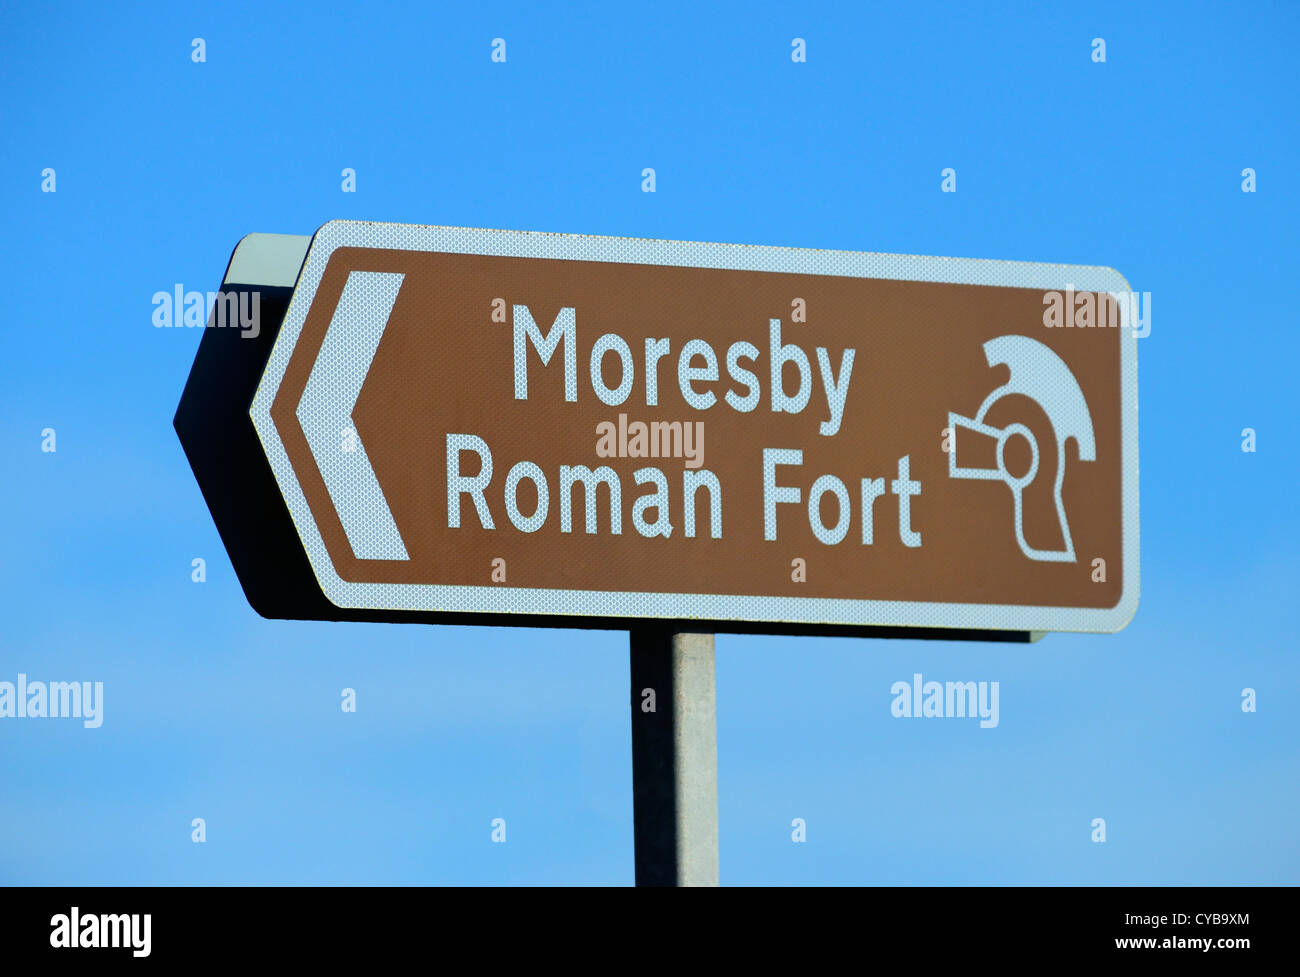 Moresby Roman Fort, signpost. Moresby, Cumbria, England, United Kingdom, Europe. Stock Photo